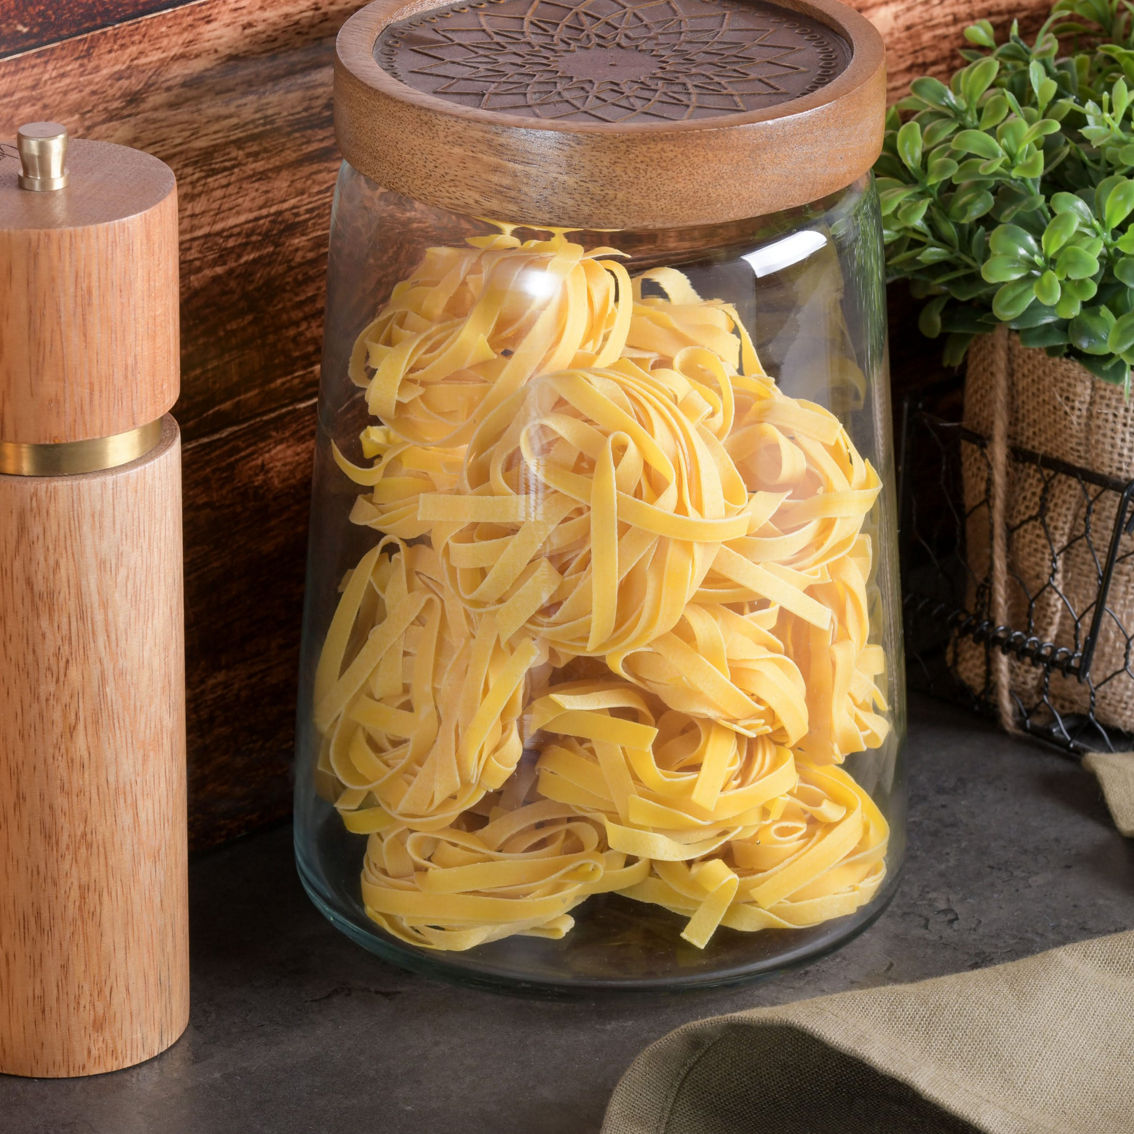 Cravings By Chrissy Teigen 5.75 Inch Glass Canister with Wood Lid - Image 5 of 5